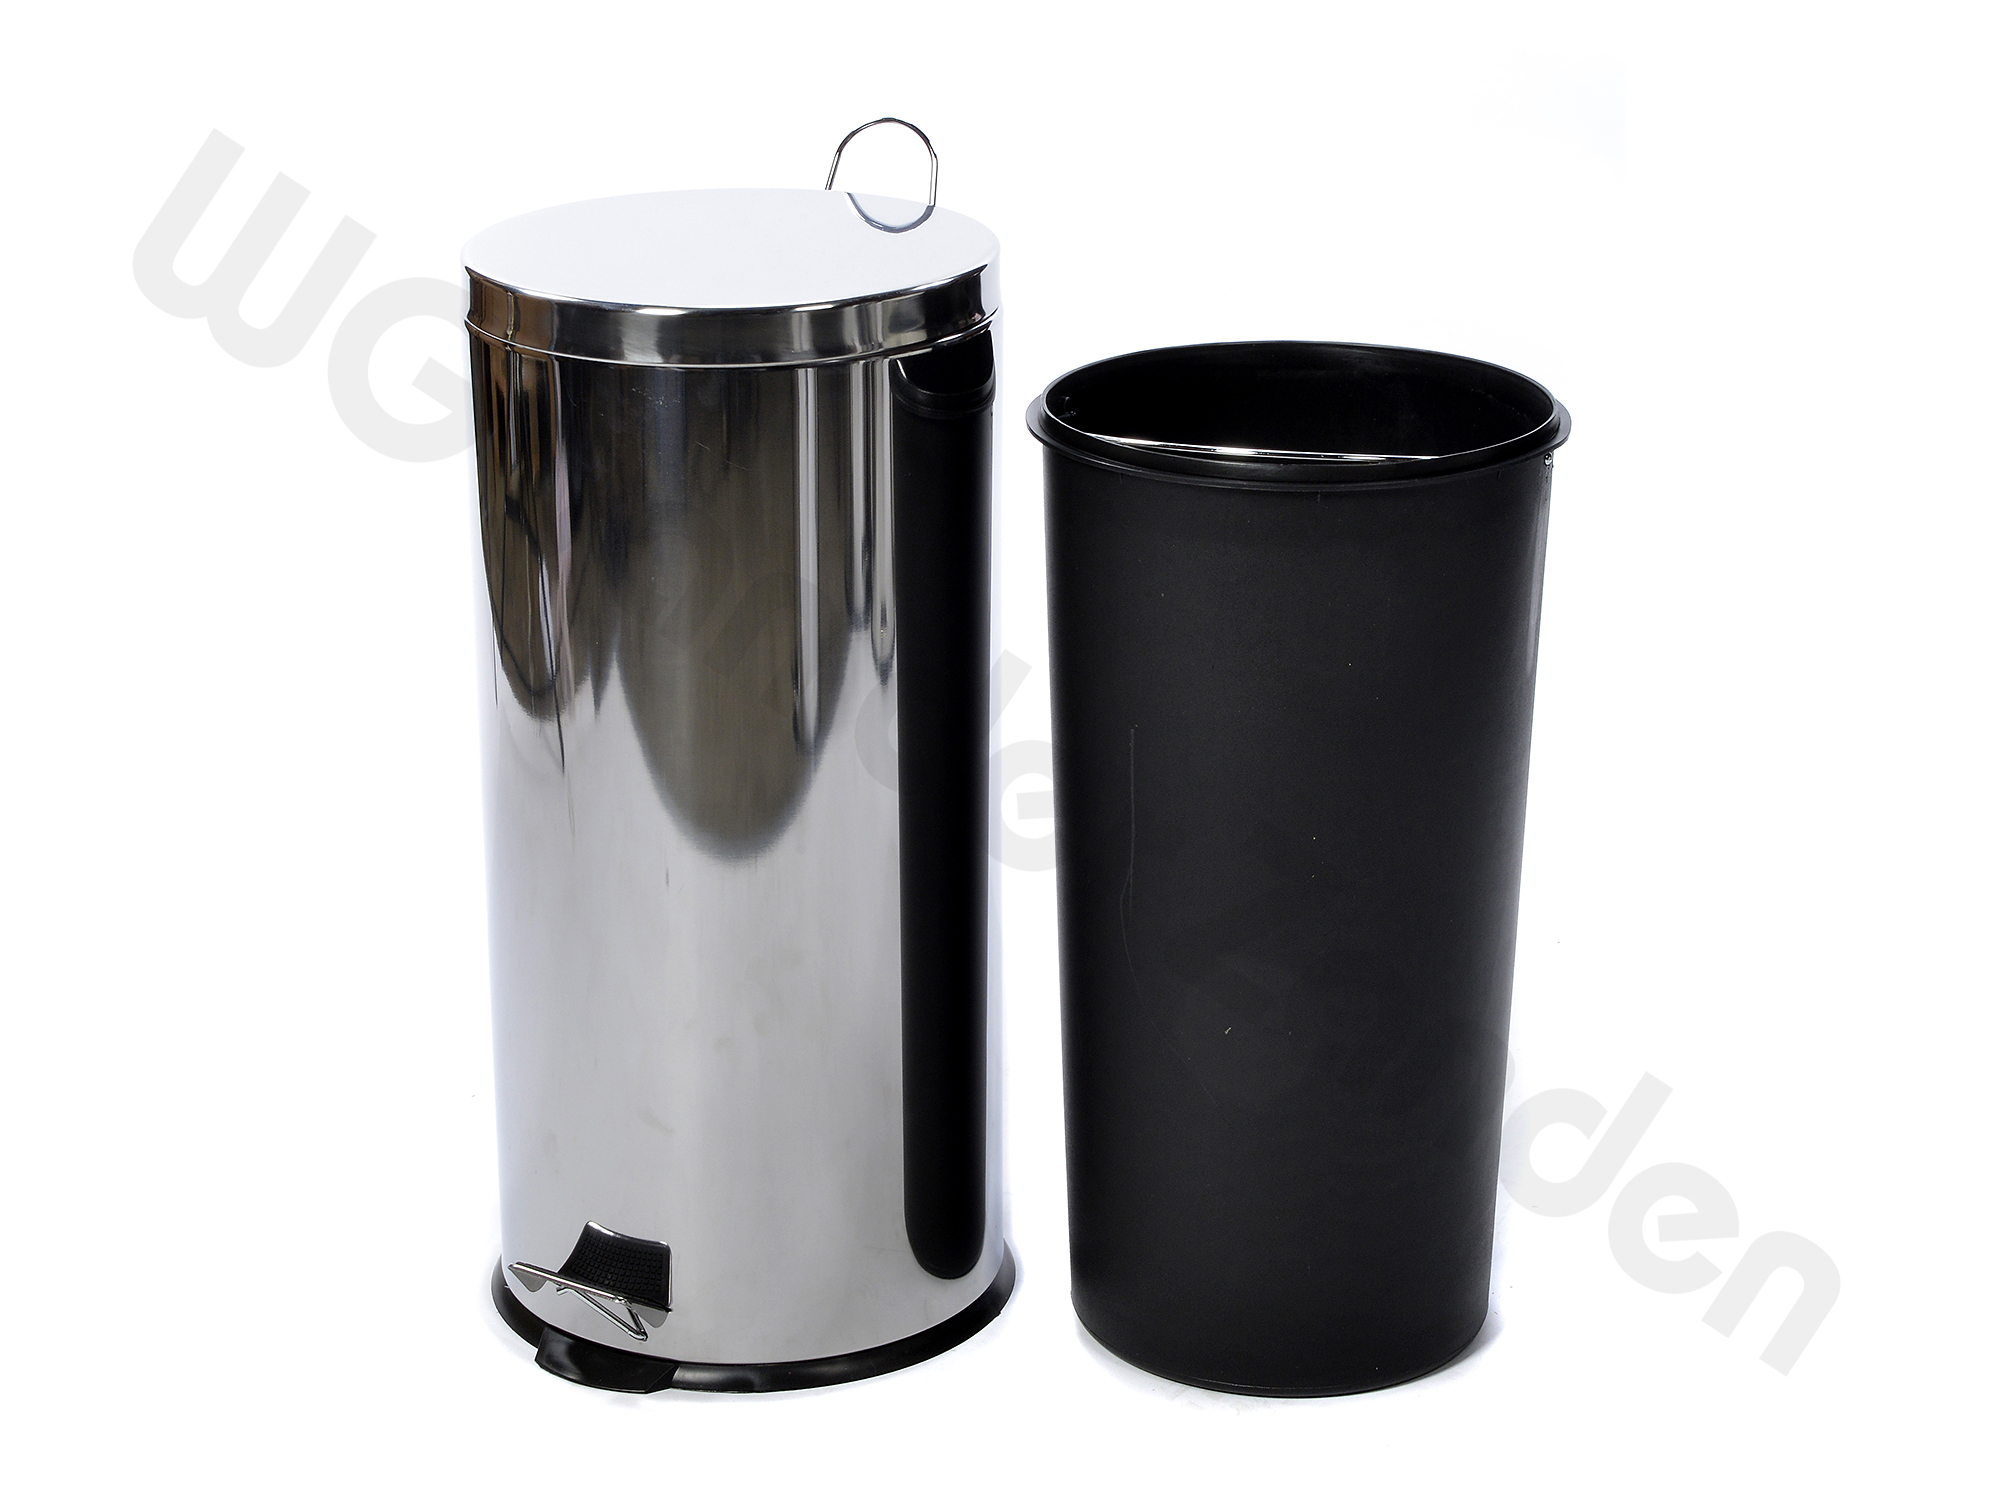 259061 PEDAL BIN 30 LTR S/S WITH PLASTIC LINER